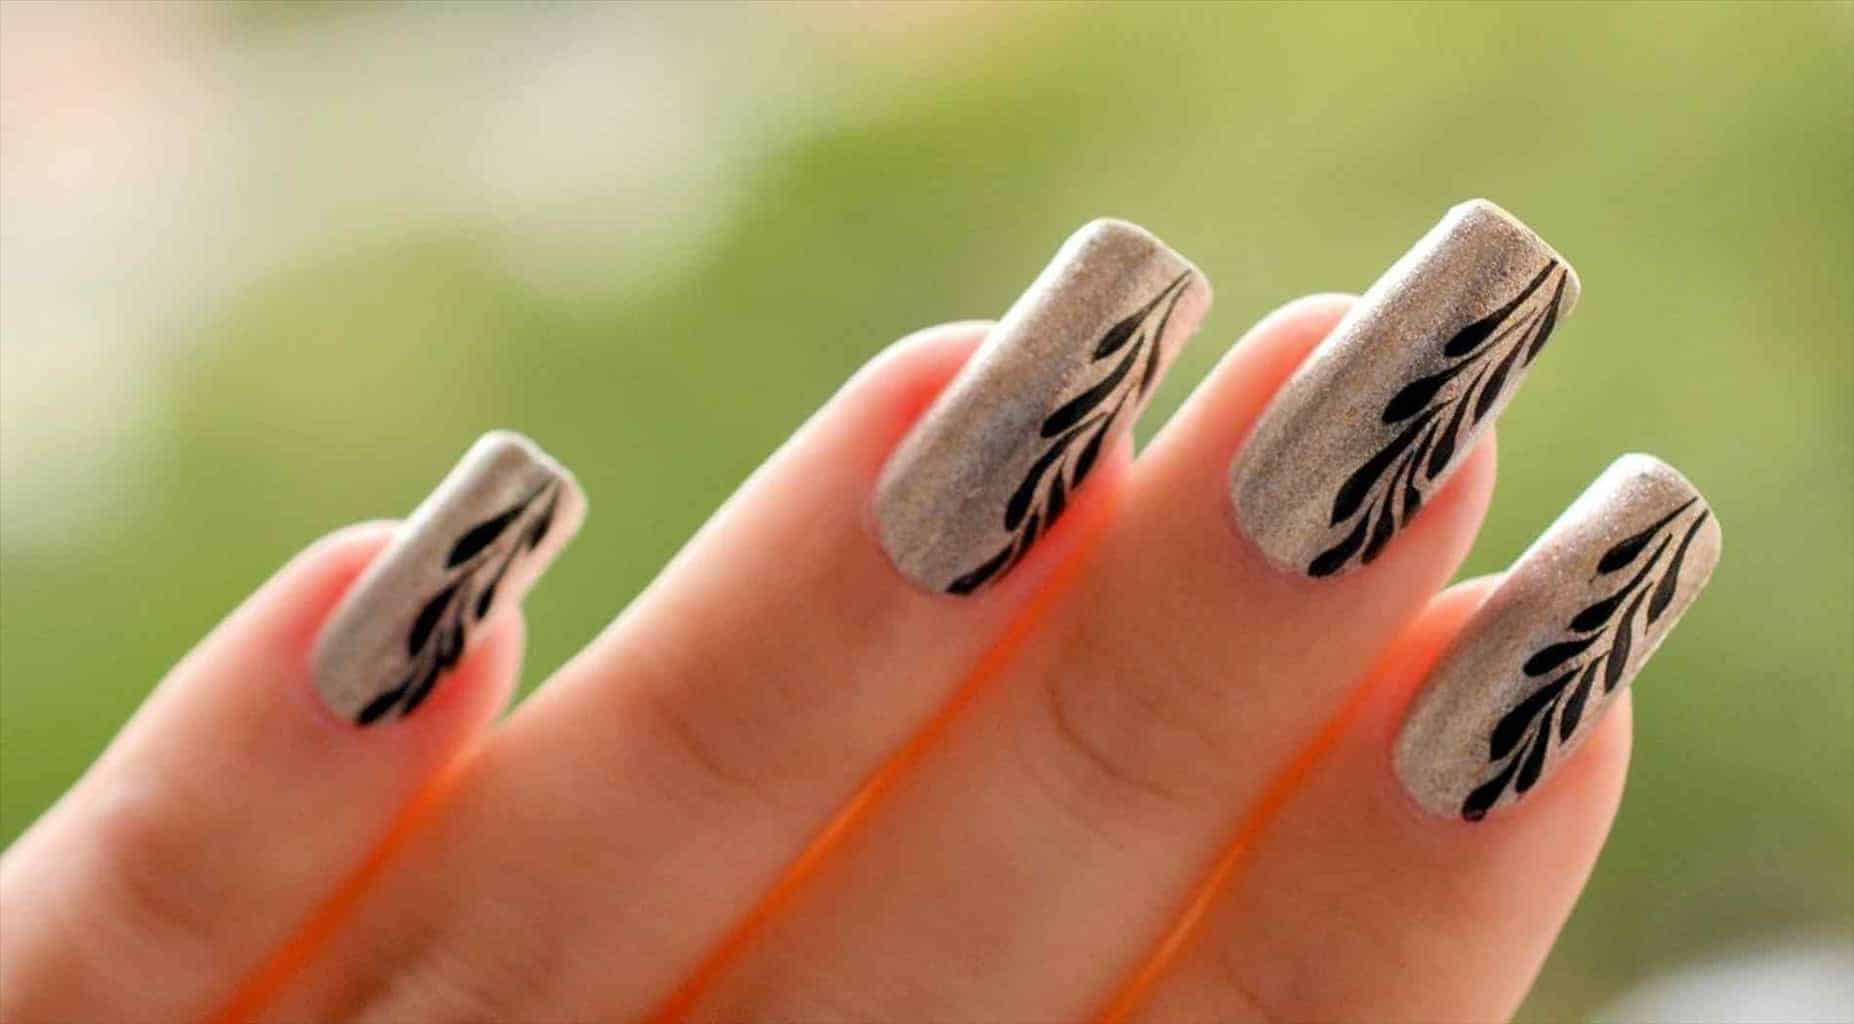 5. Creative Nail Art Designs to Do at Home - wide 6